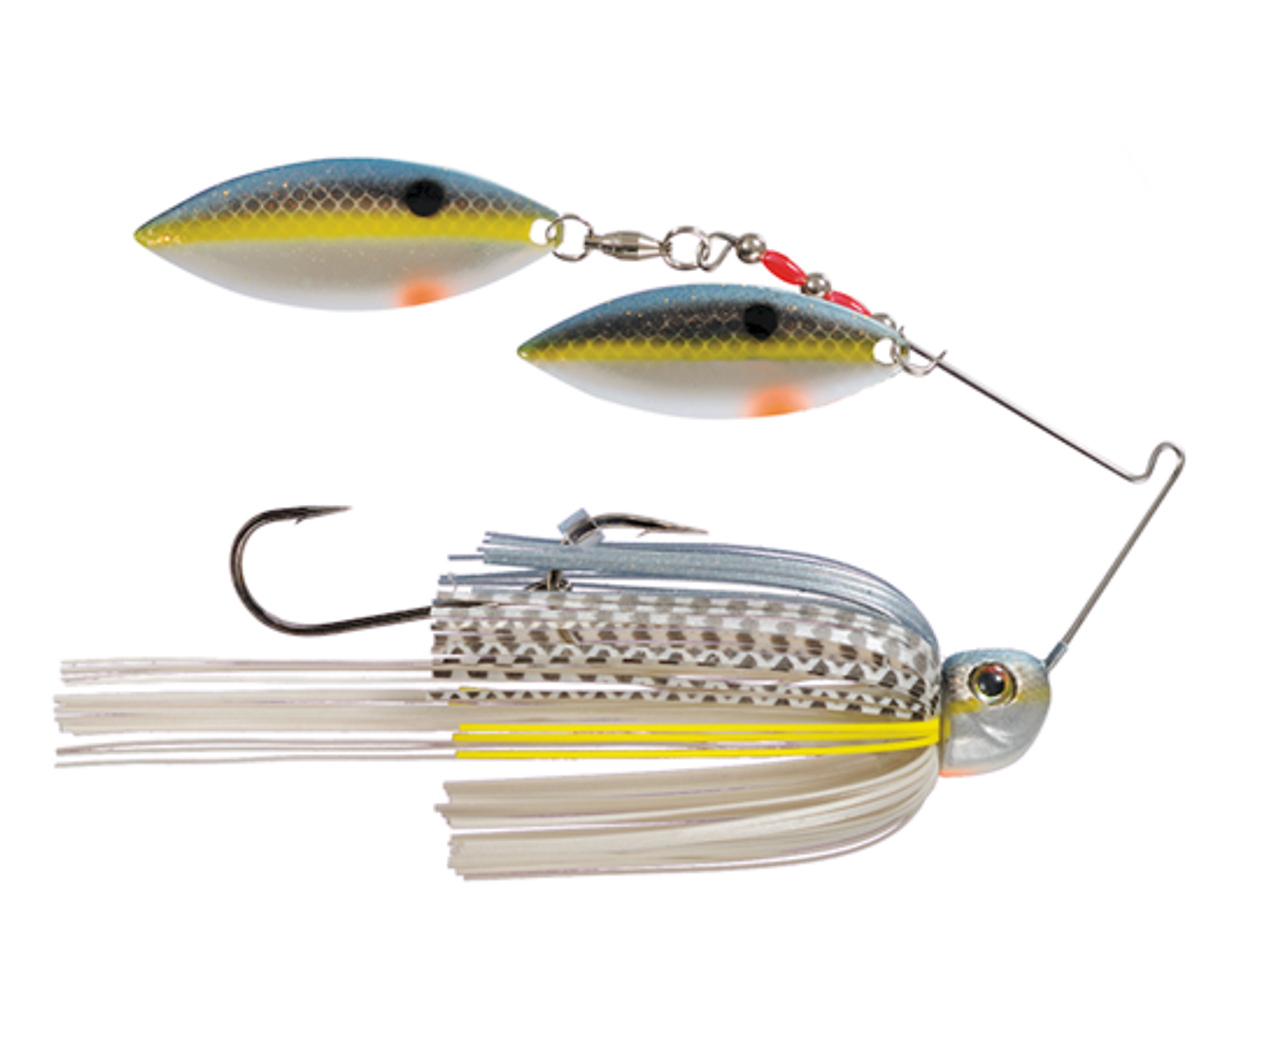 https://cdn11.bigcommerce.com/s-7ij2ioq/images/stencil/1280x1280/products/5371630/138853/tgsb12ww-514p_spinnerbait_chromesexyshad_sideright__73034.1680276847.png?c=2